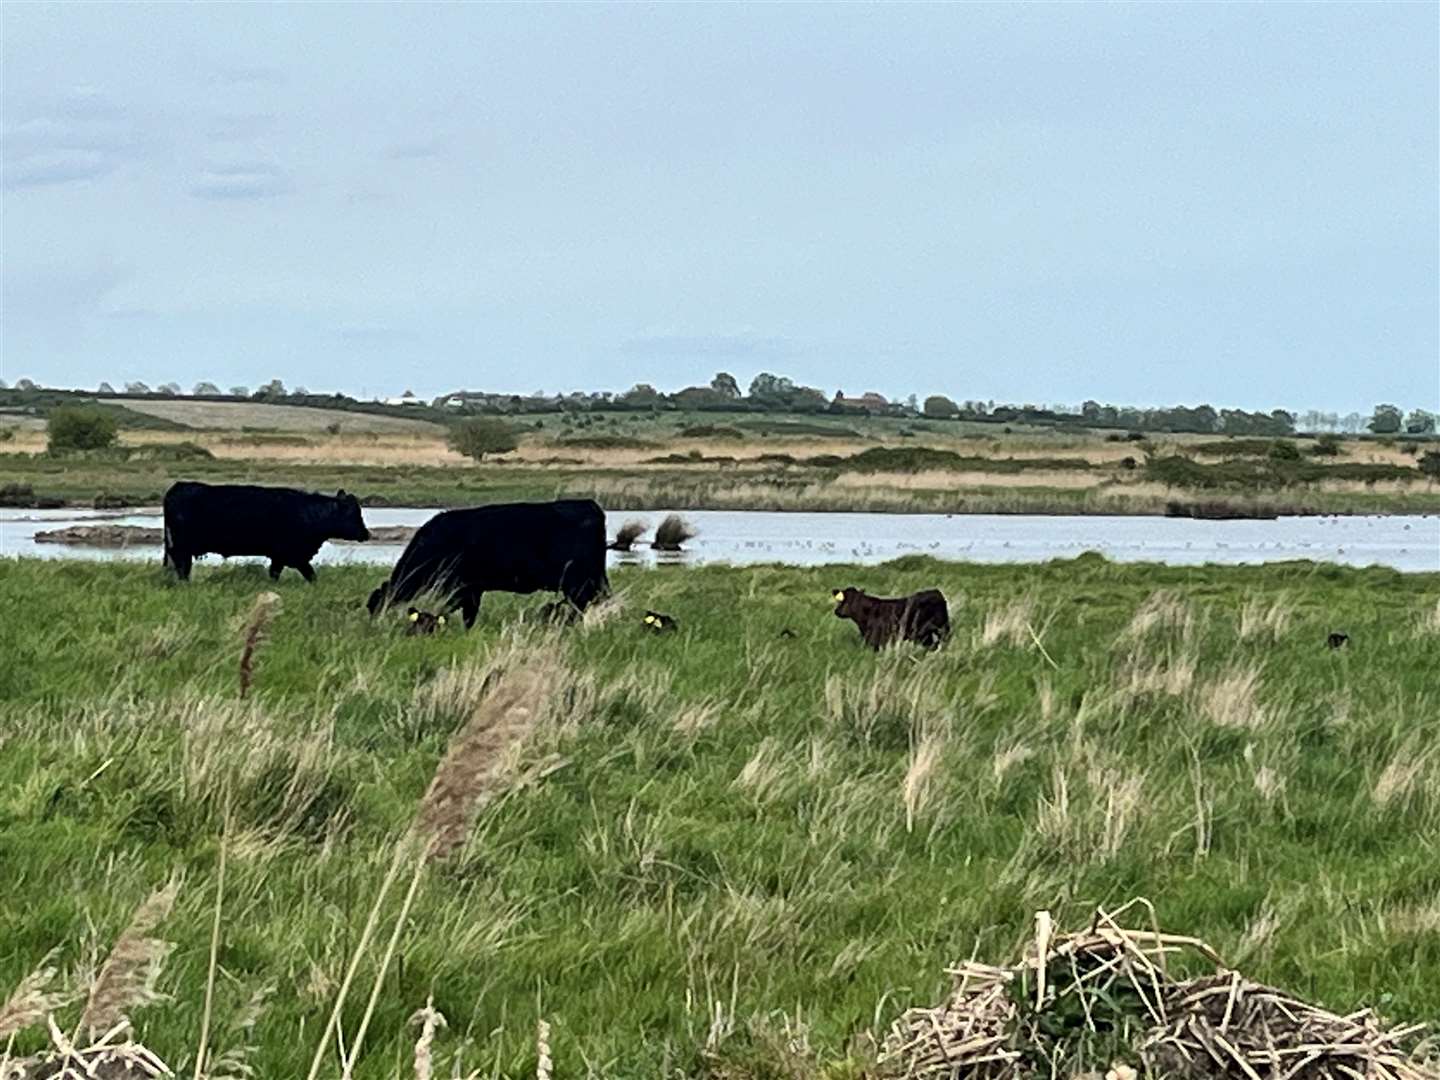 The cattle were in two fields on either side of the path into the marsh